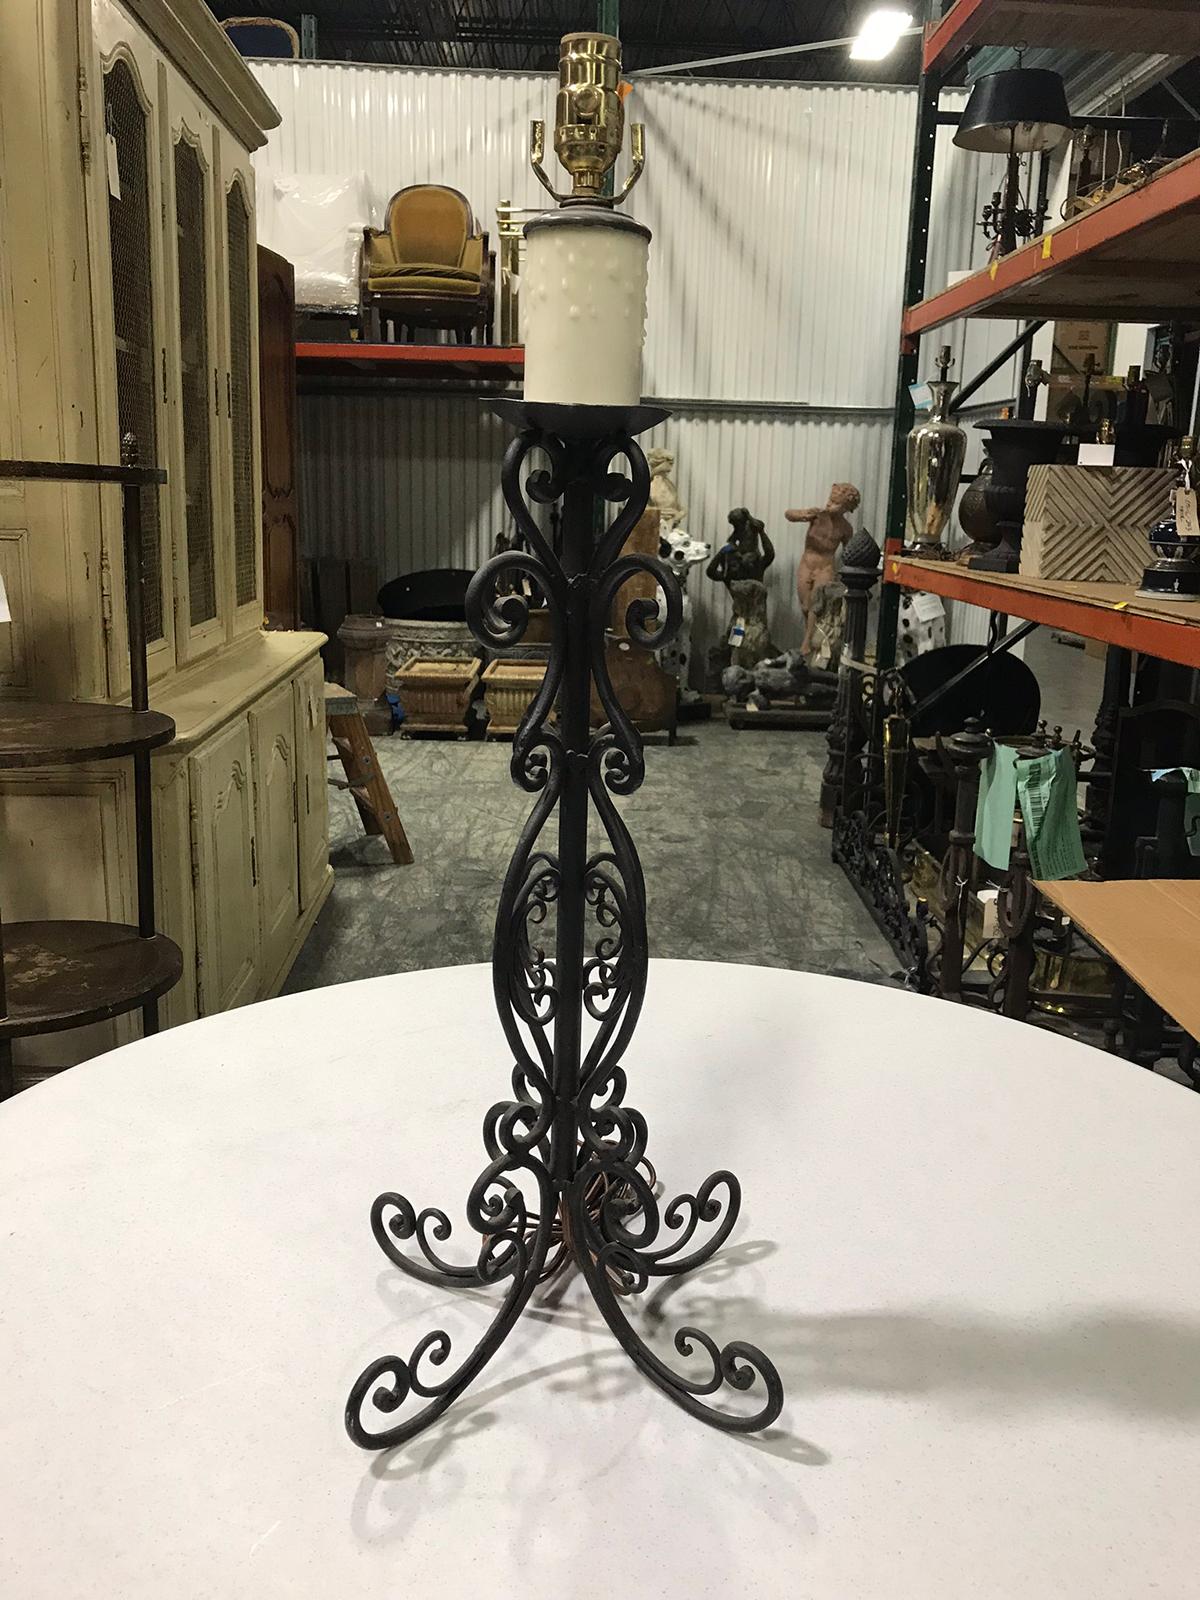 Mid-20th century wrought iron candlestick as lamp
New wiring.